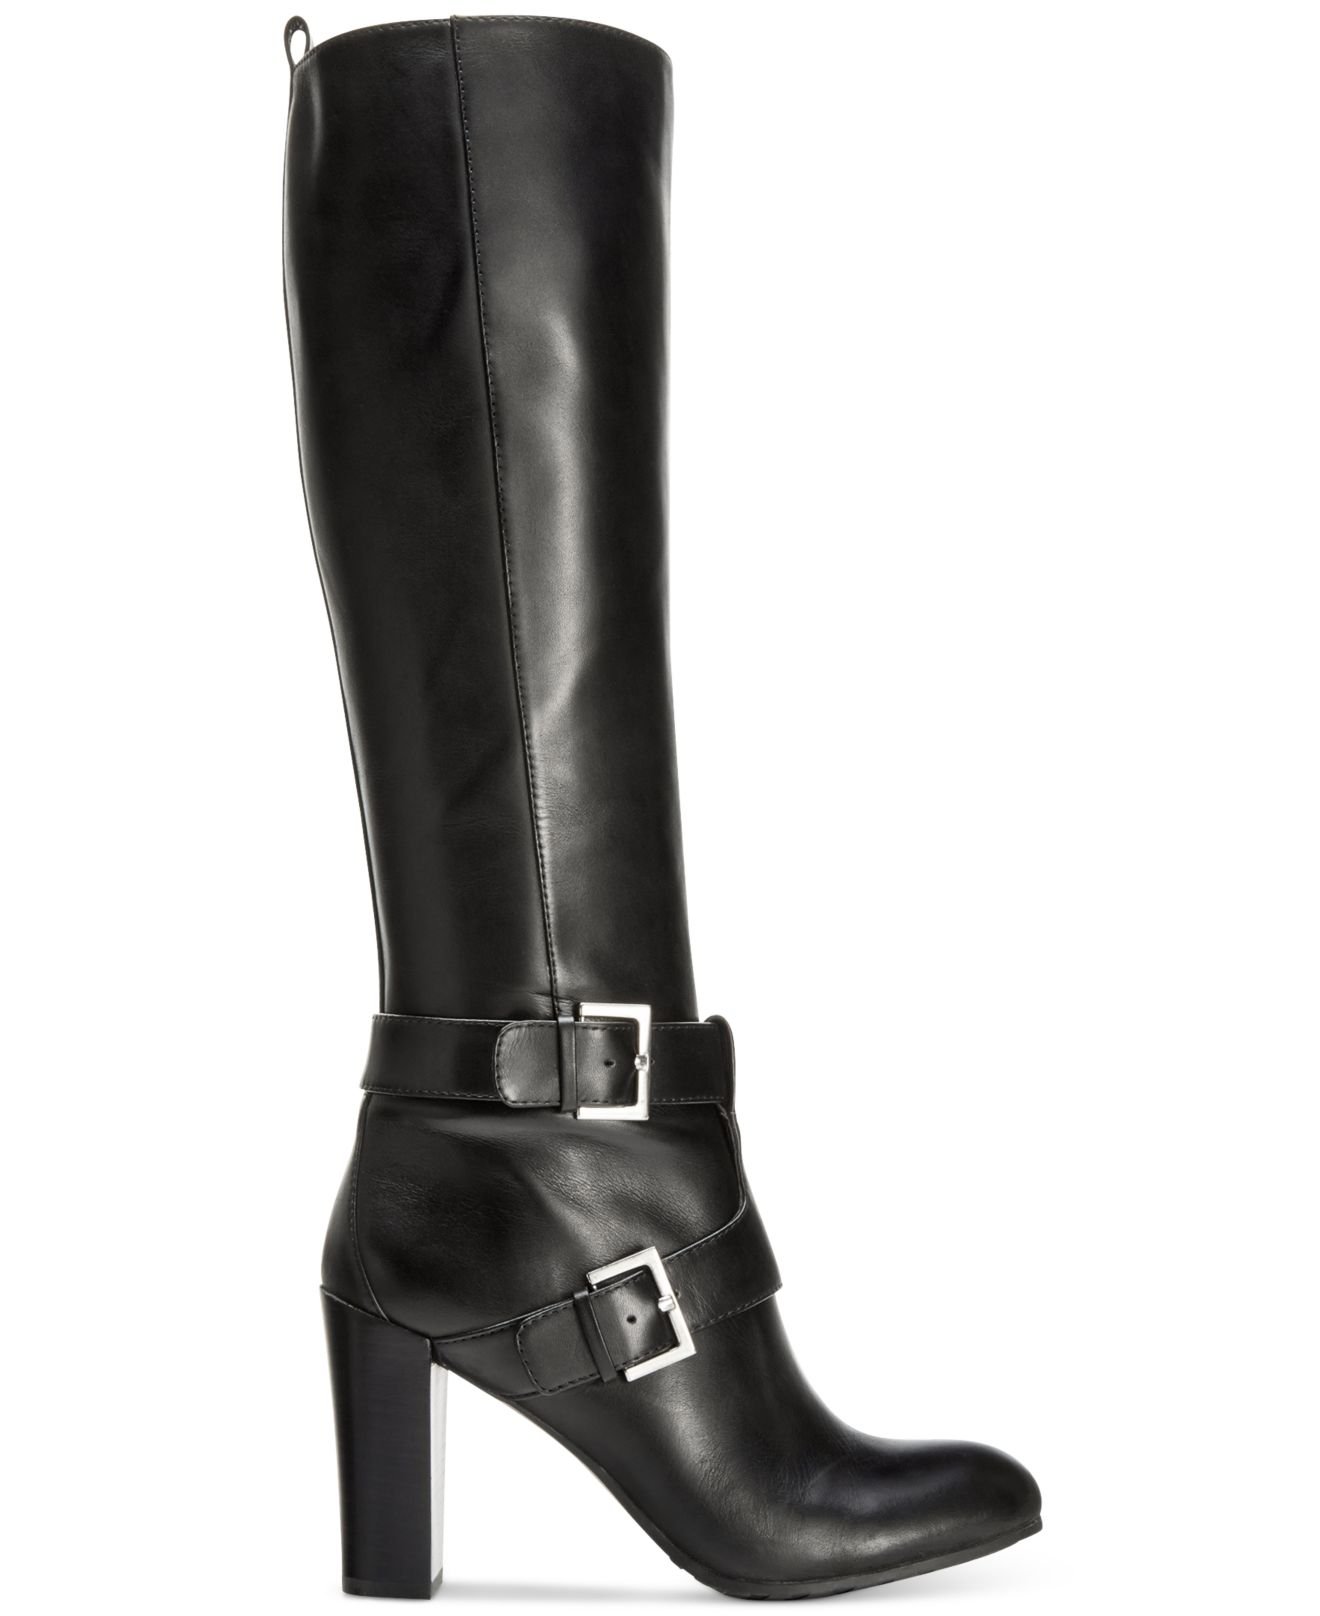 Nine west Skylight Wide Calf Tall Dress Boots in Black (Black Leather ...